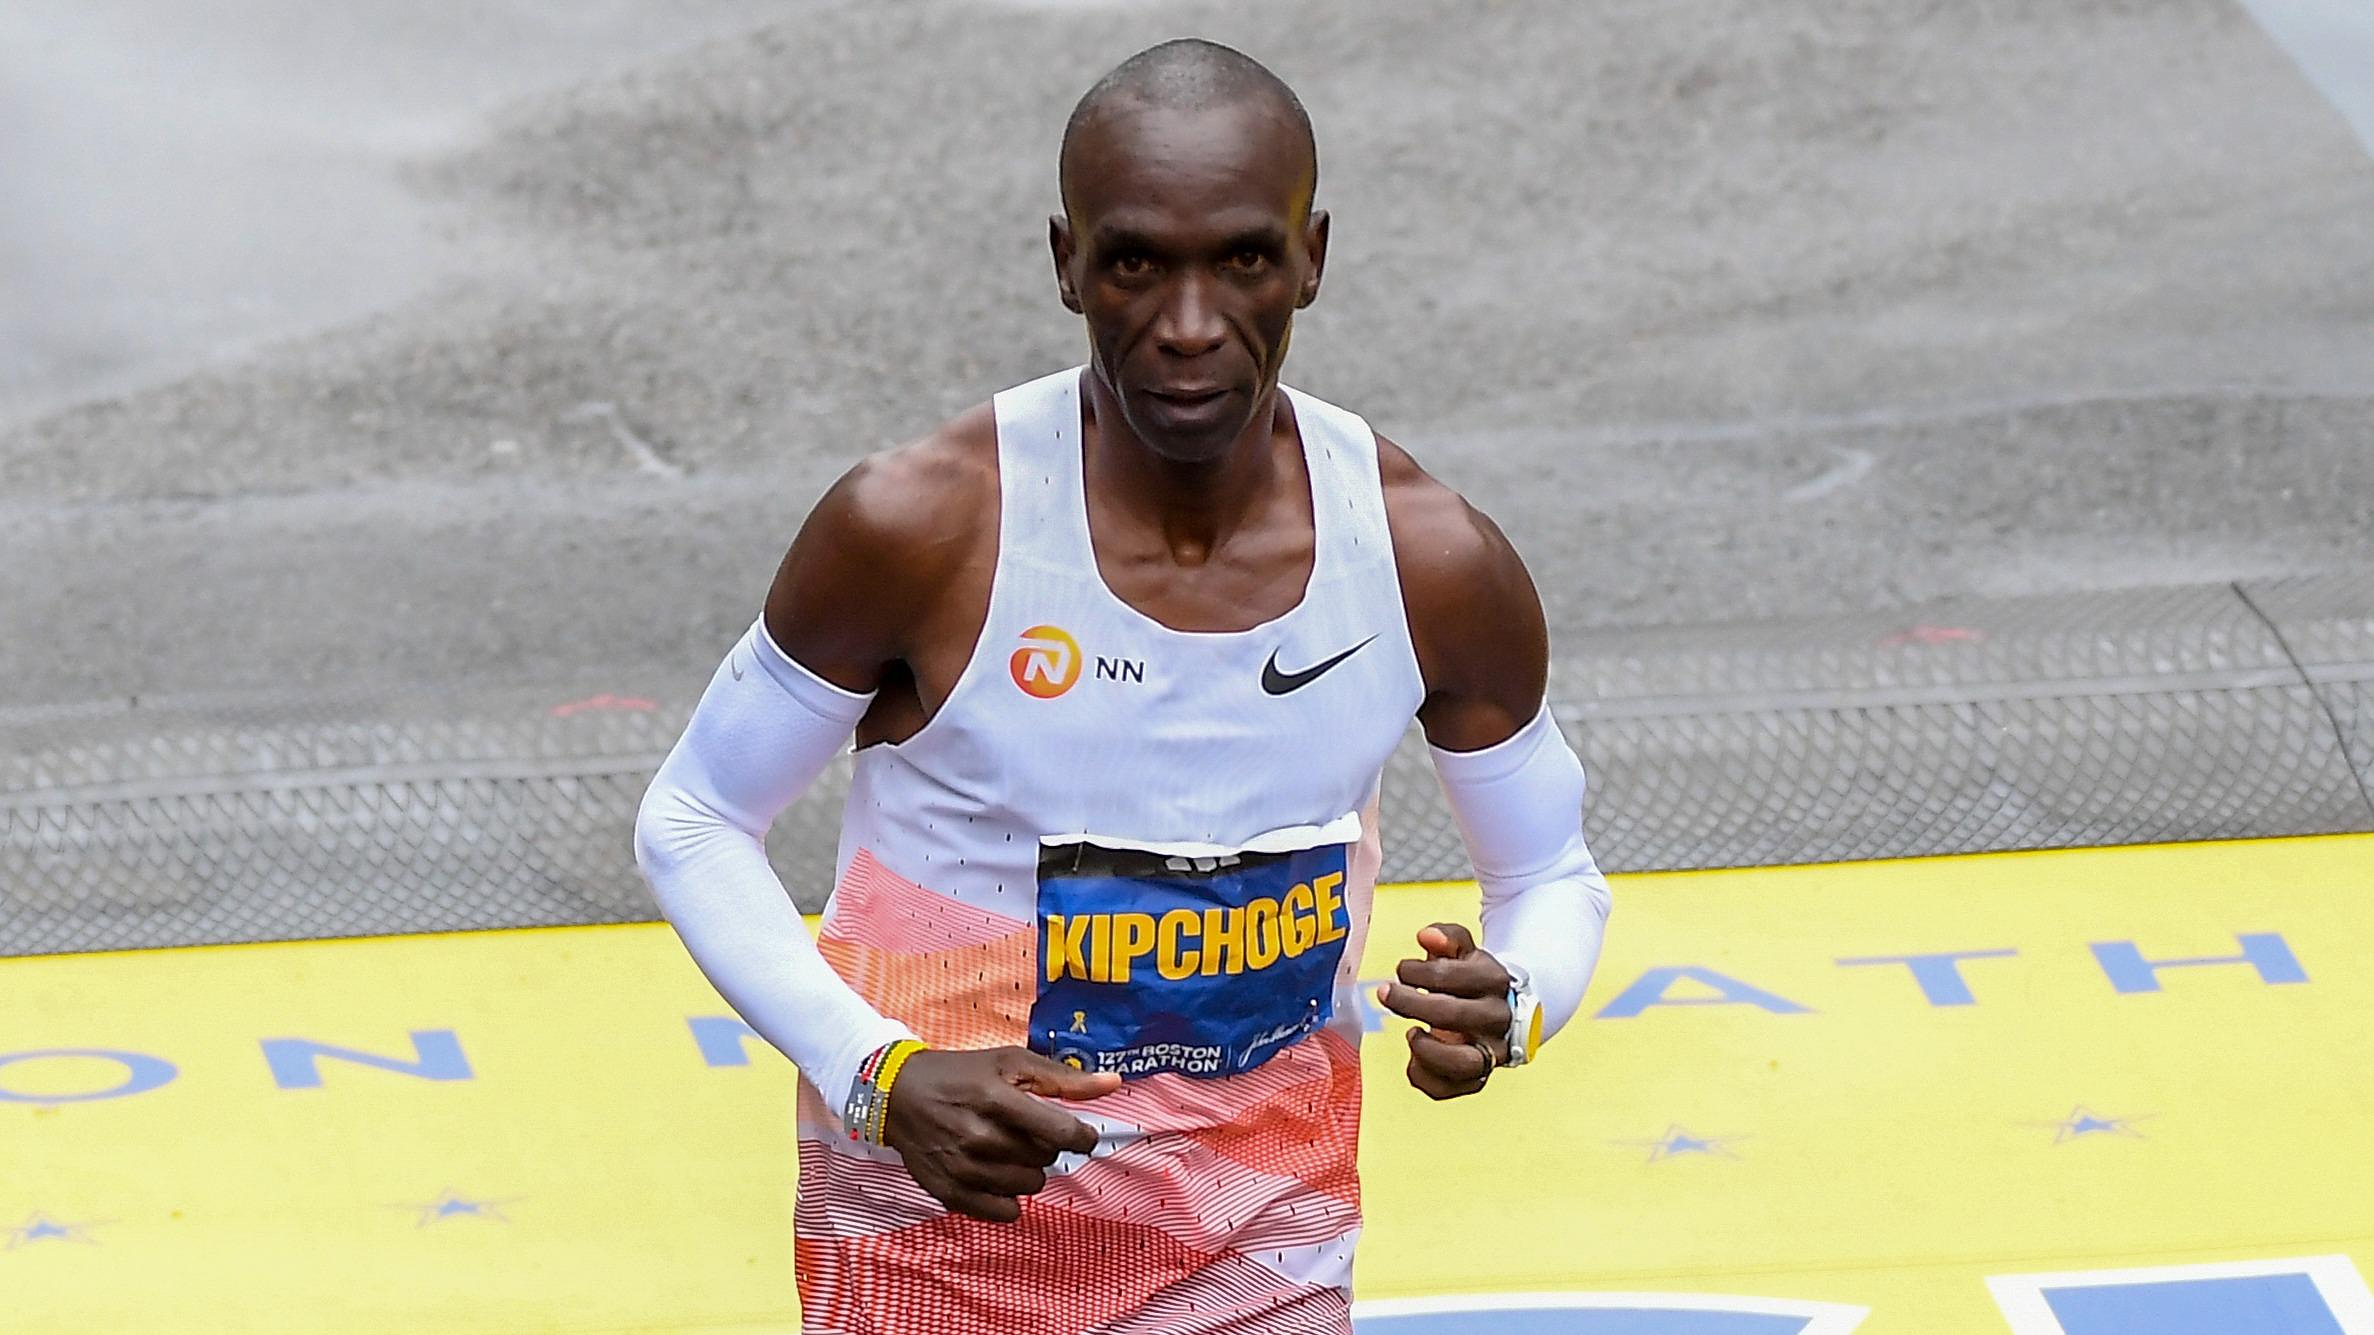 2024 Olympics: the two marathon stars Kipchoge and Kiptum in the Kenyan preselection